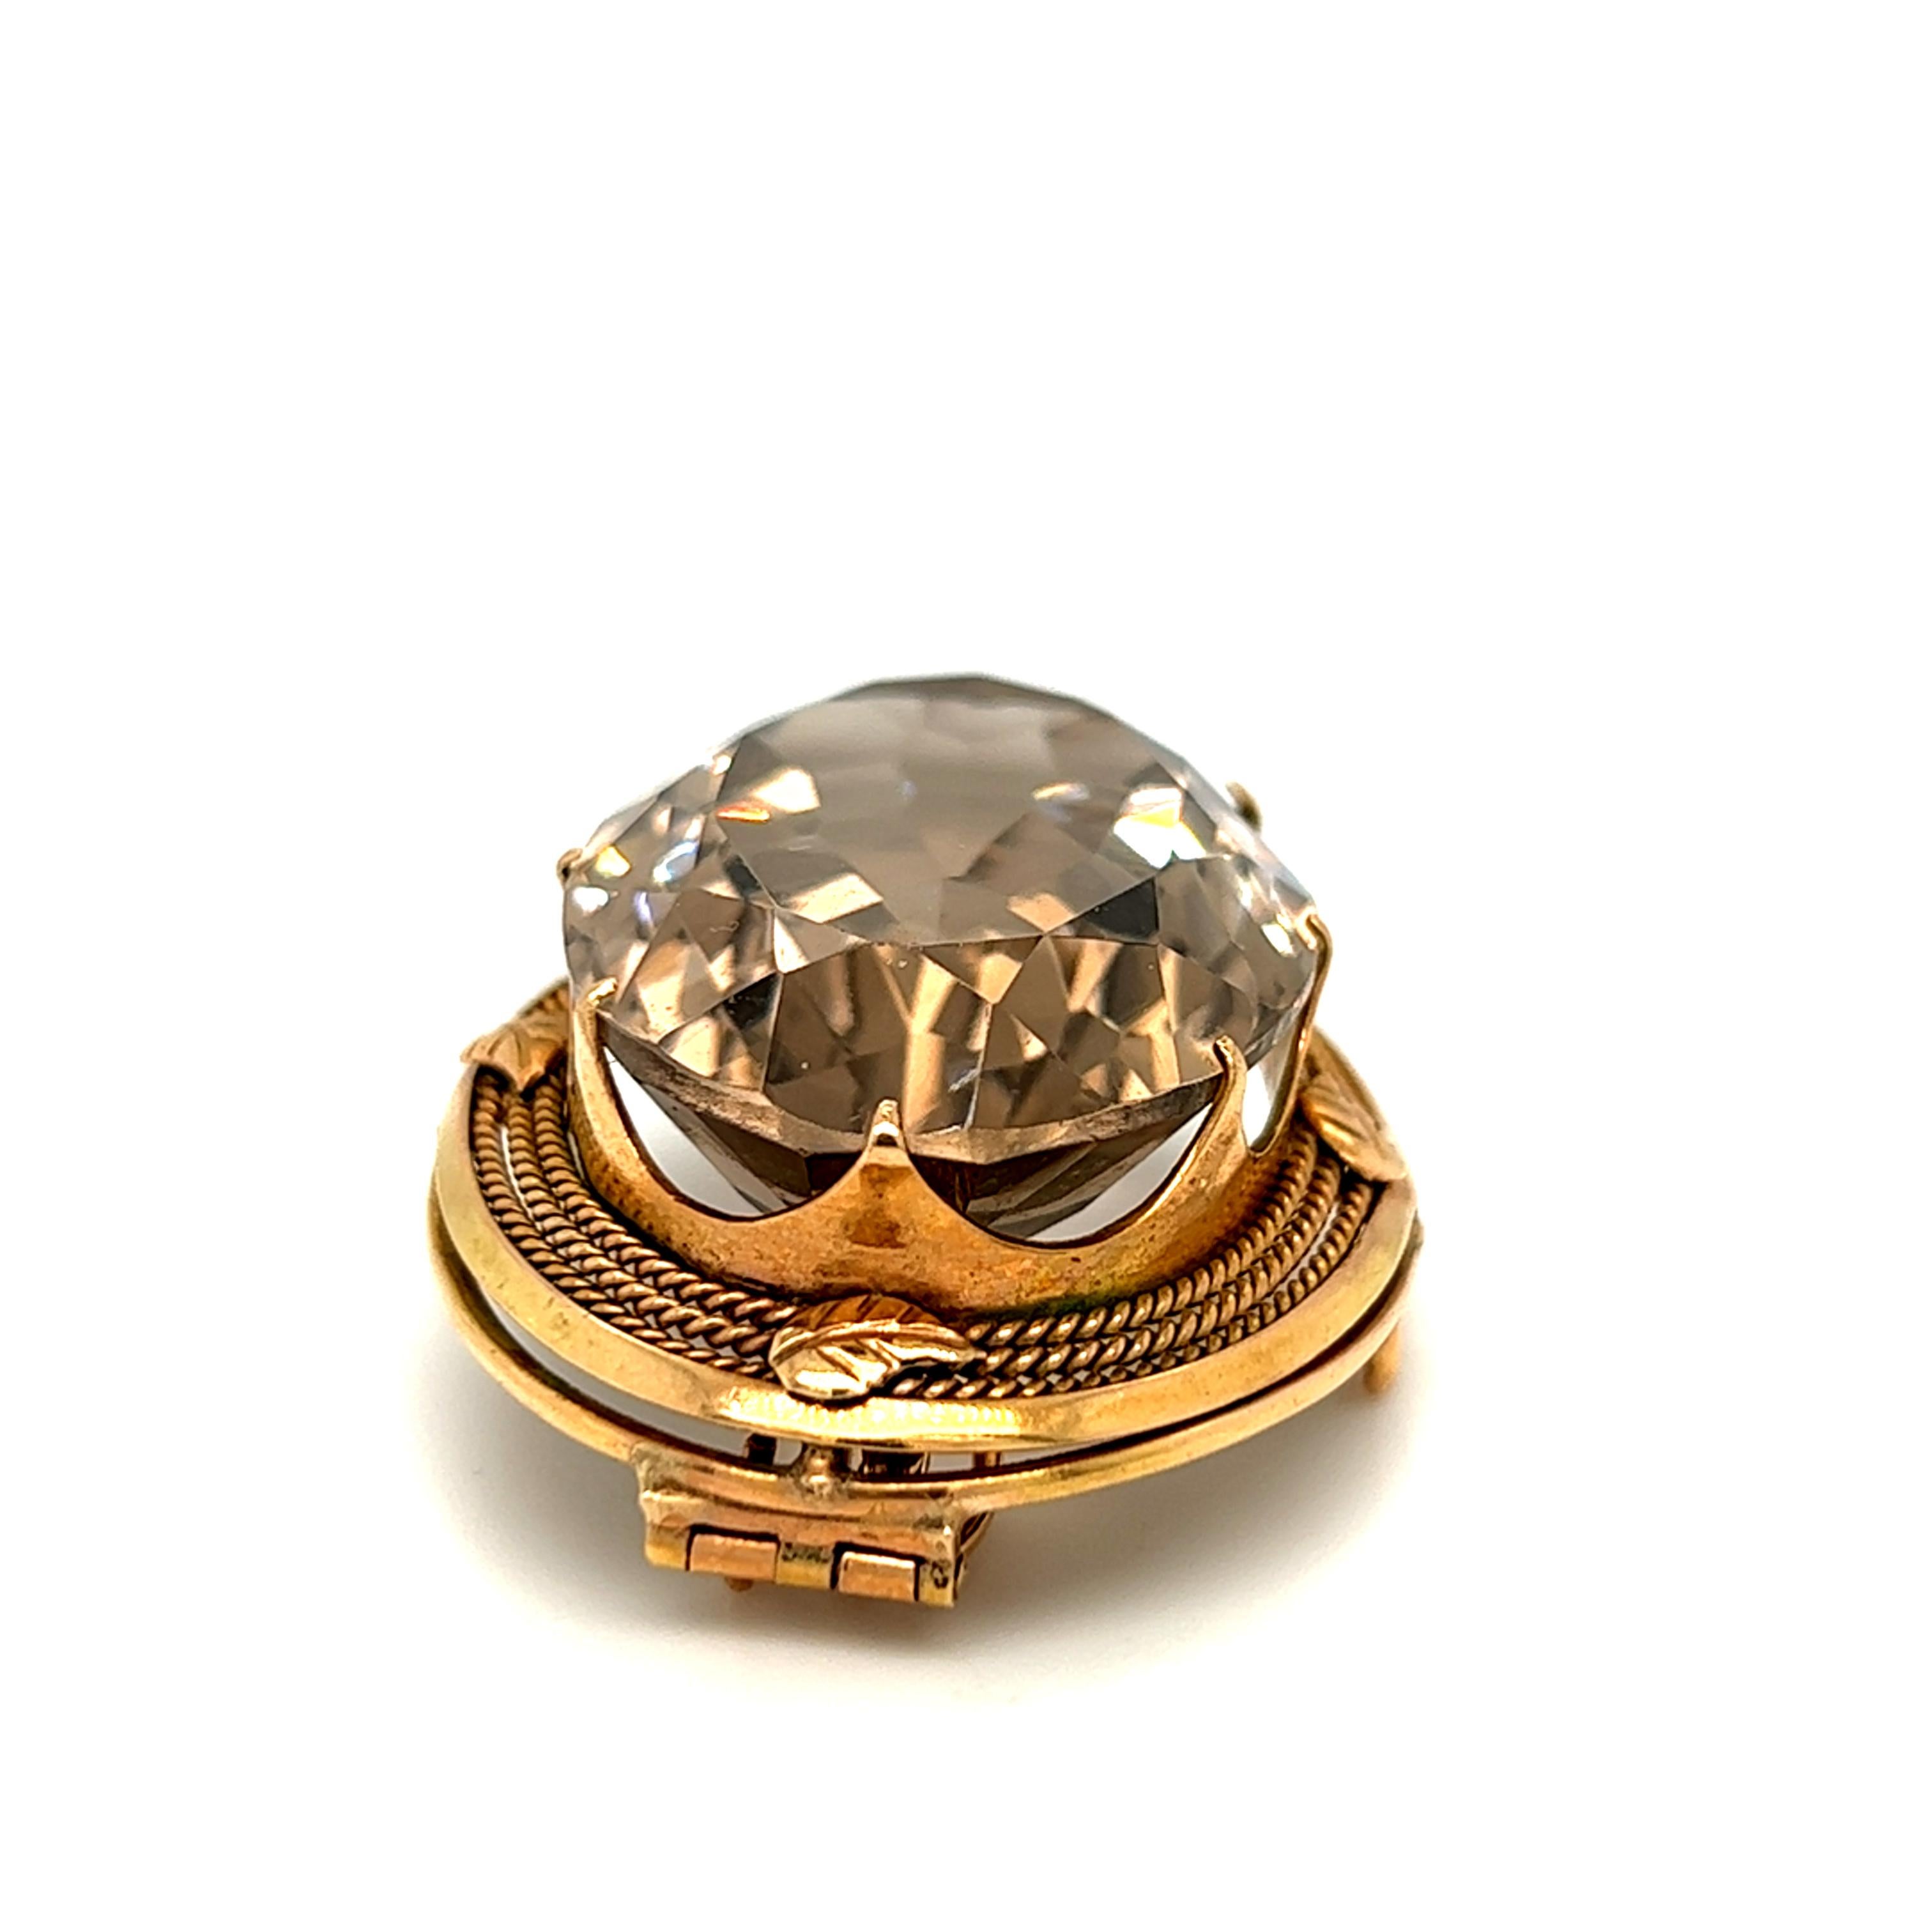 Antique Smokey Quartz Convertible Pendant Brooch 14k Yellow Gold In Good Condition For Sale In beverly hills, CA